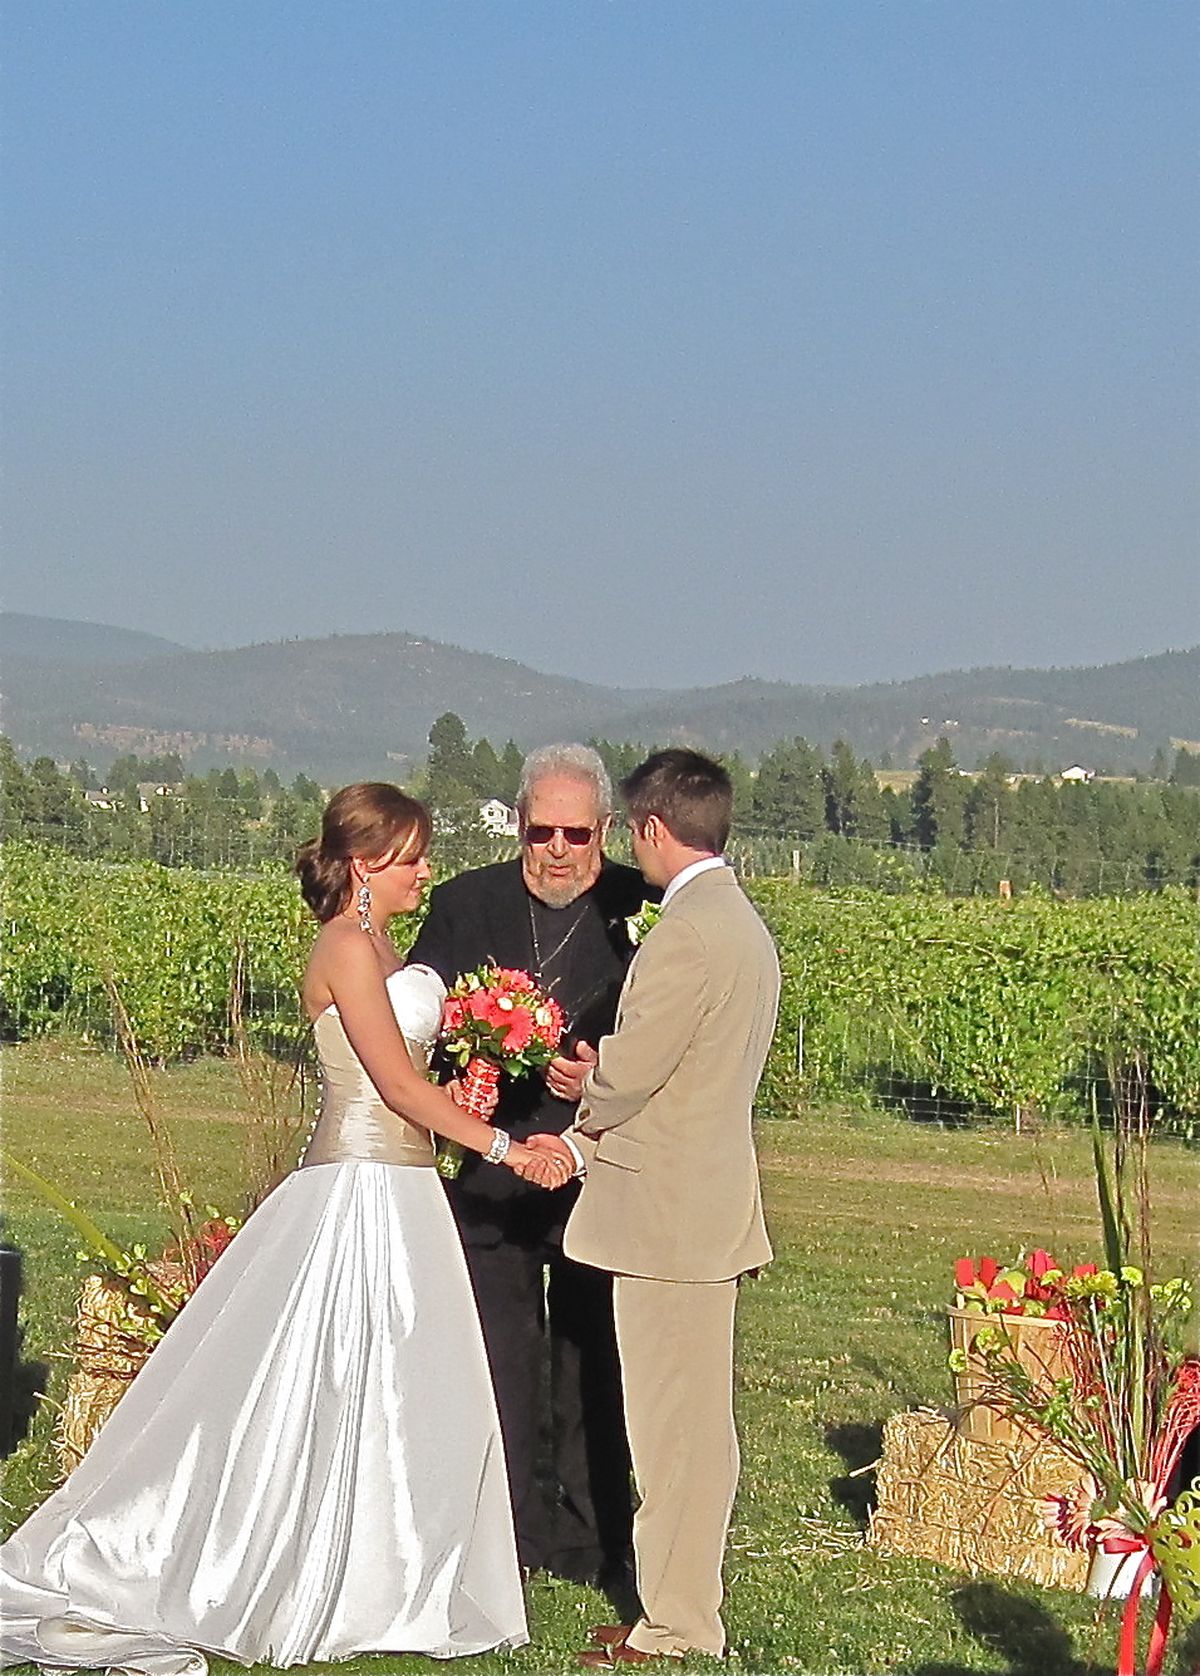 Trezzi Farm at Green Bluff made a wonderful location for the September wedding of Moira Hurley and Joey Davin. Pastor Dan Eubank performed the ceremony.  (Cheryl-Anne Millsap / Kiss The Bride NW)